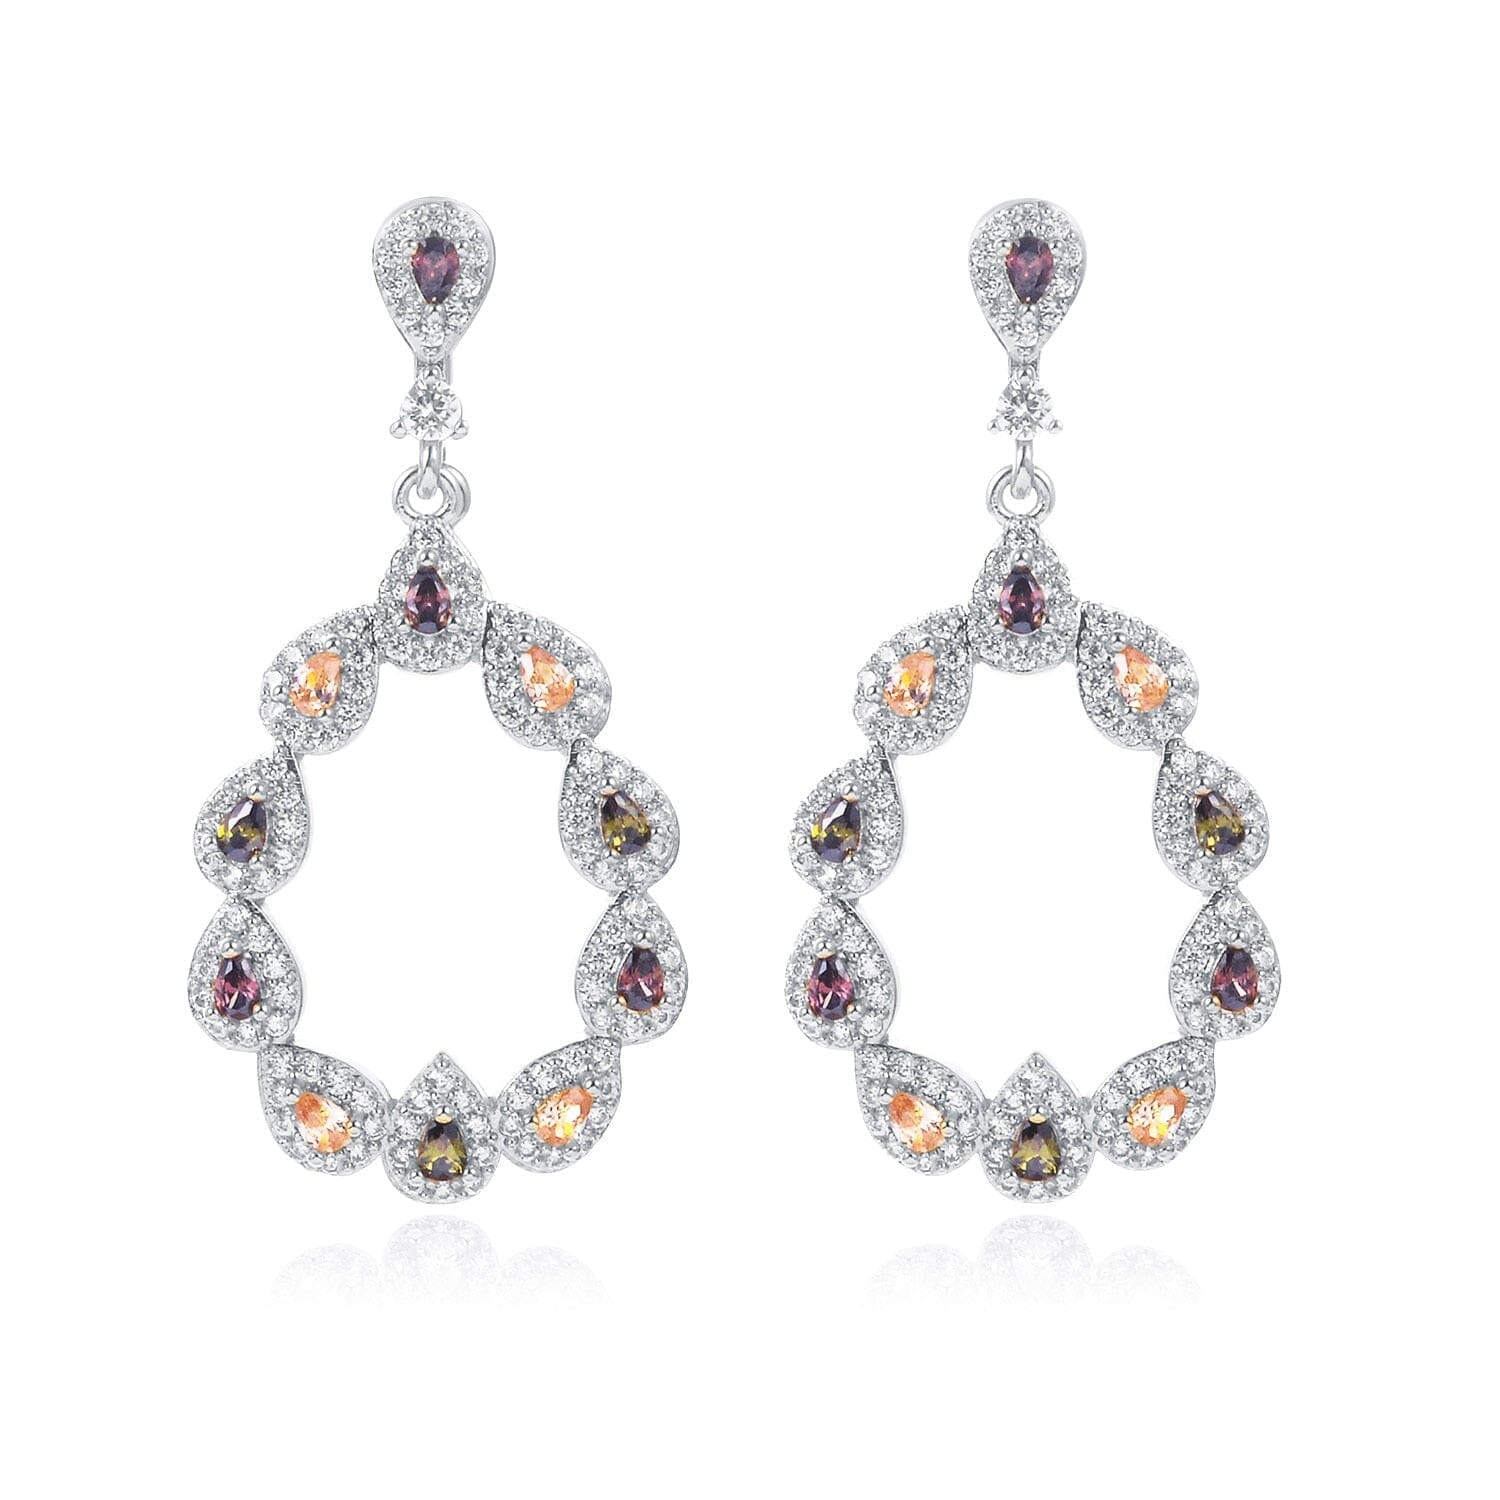 Stunning Fashion Colorful Crystal Drop Flash EarringsEarringsSILVER COLOFUL